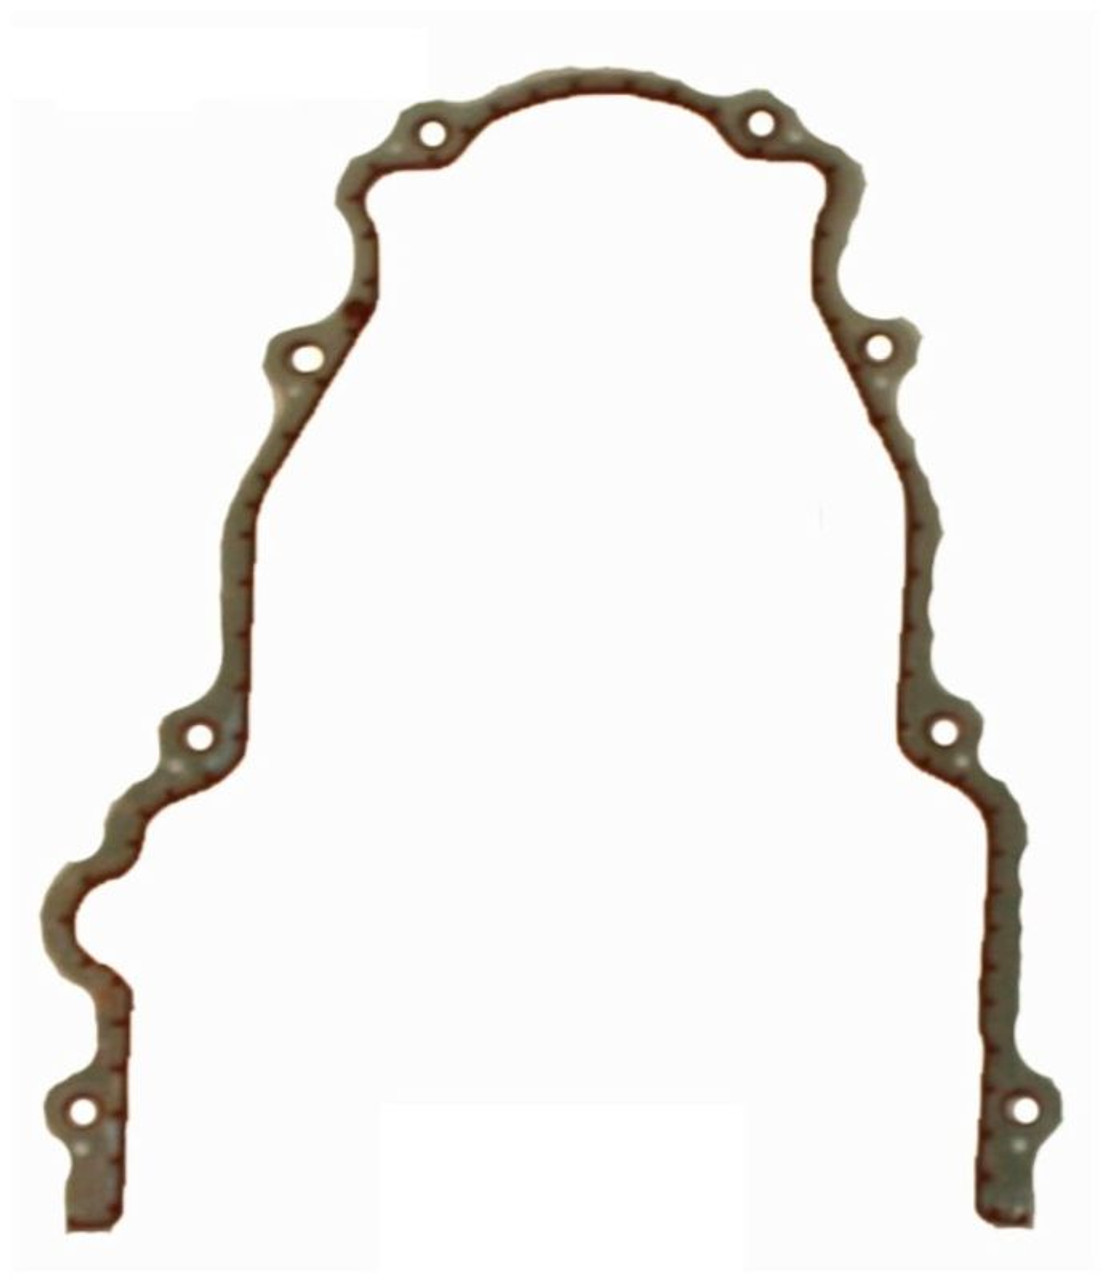 2009 Chevrolet Avalanche 6.0L Engine Timing Cover Gasket TCG293-A -550